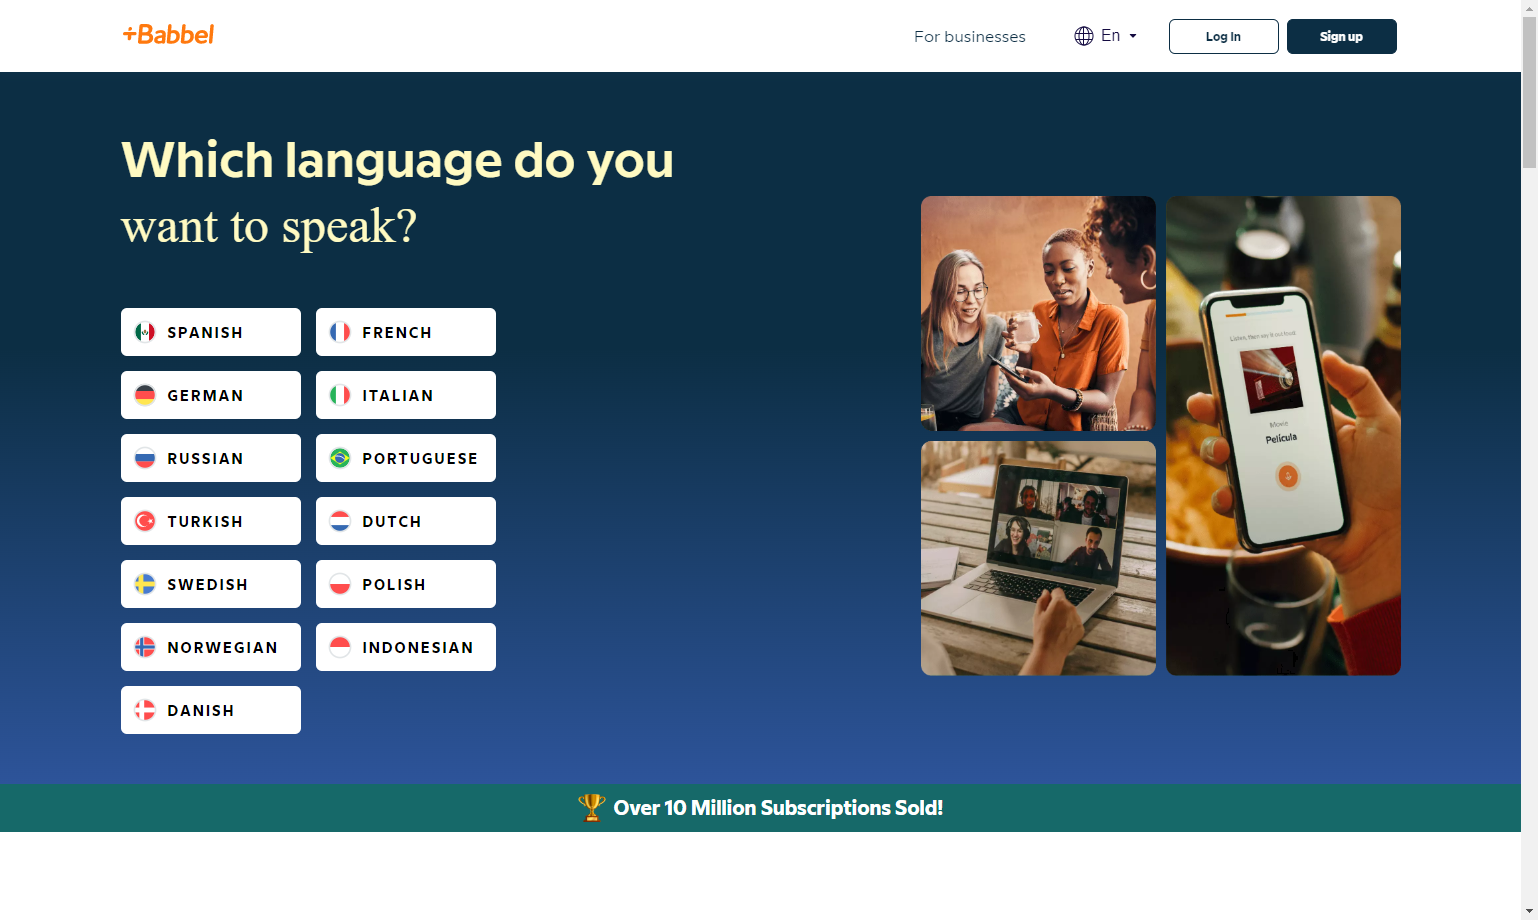 Languages provided by Babbel